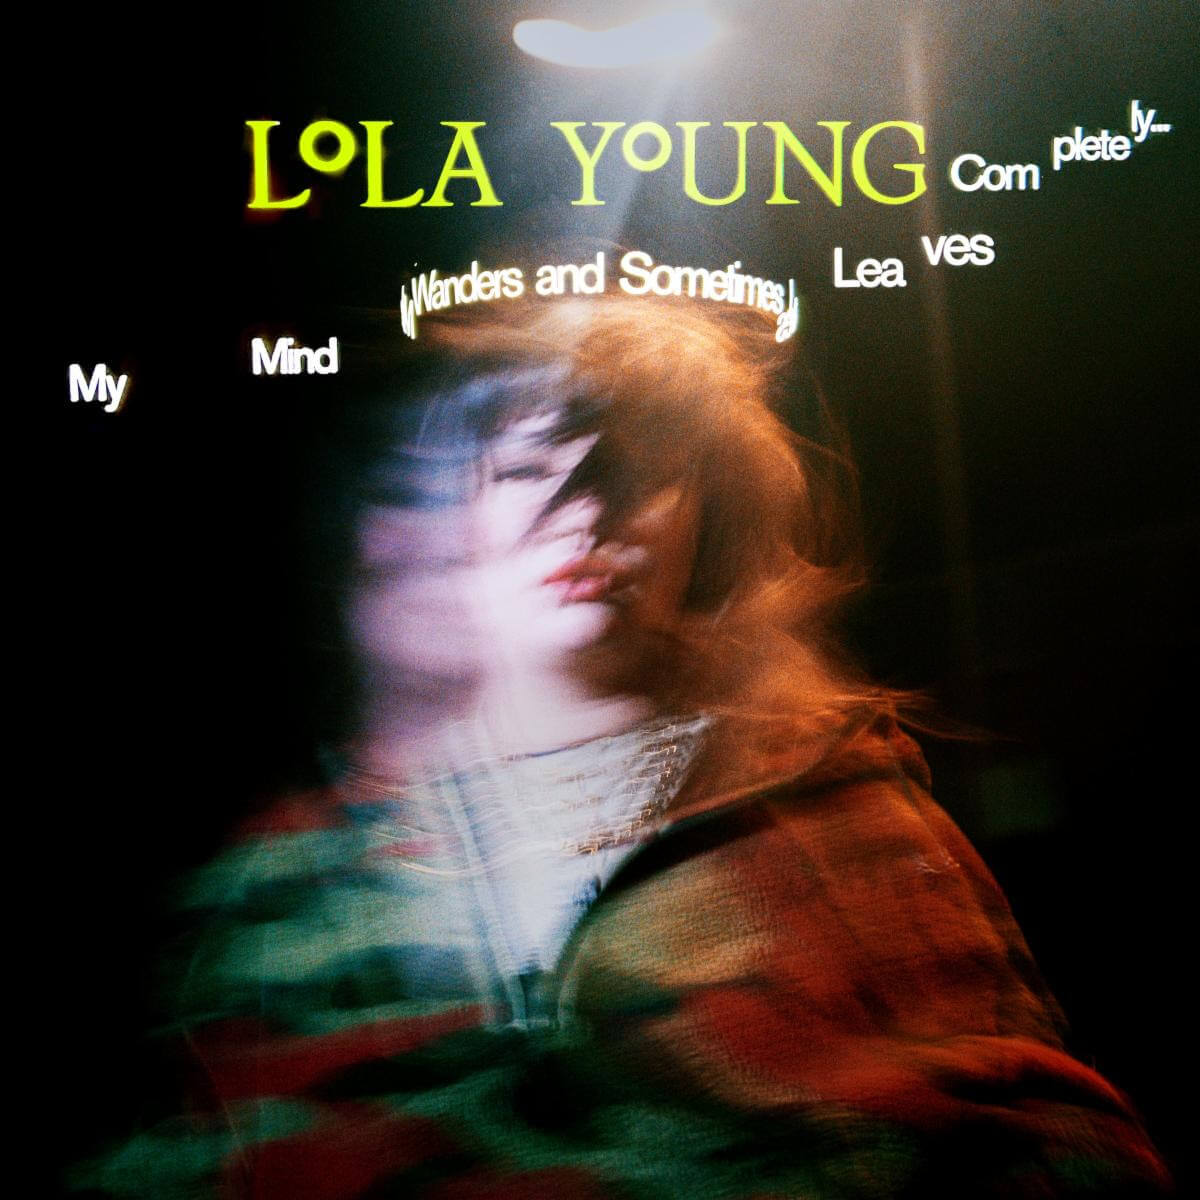 Lola Young has released new single “Revolve Around You,” the track is off her new album My Mind Wanders And Sometimes Leaves Completely